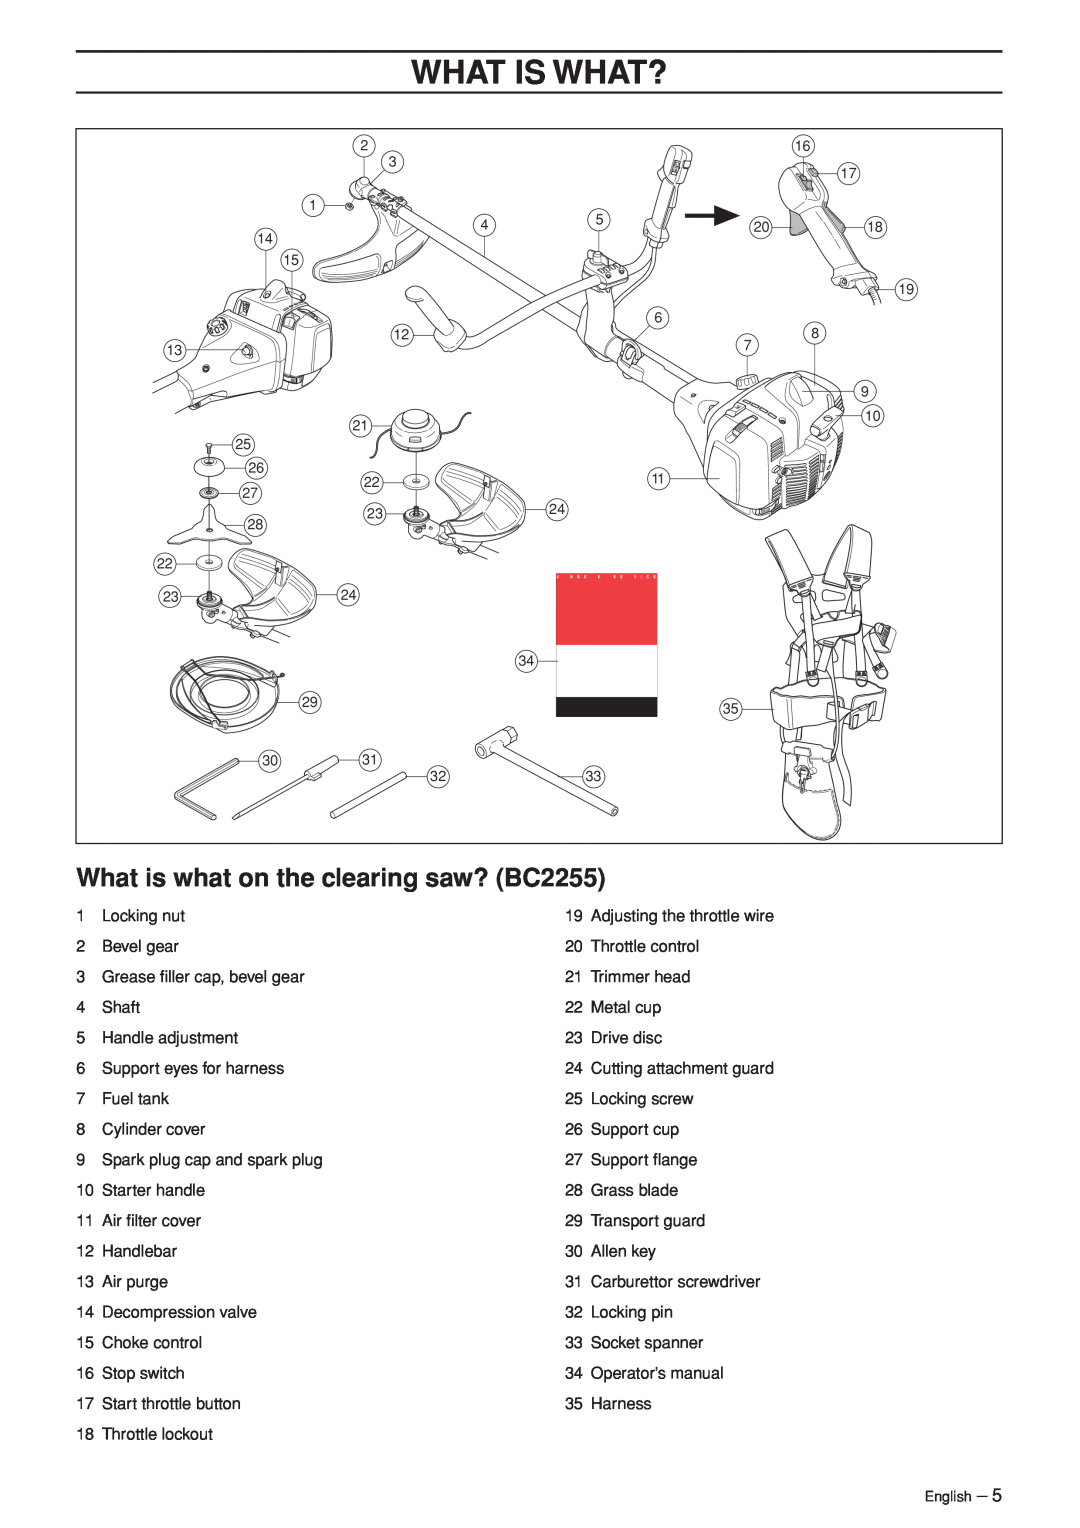 Jonsered BC 2255, FC 2255W manual What Is What?, What is what on the clearing saw? BC2255 